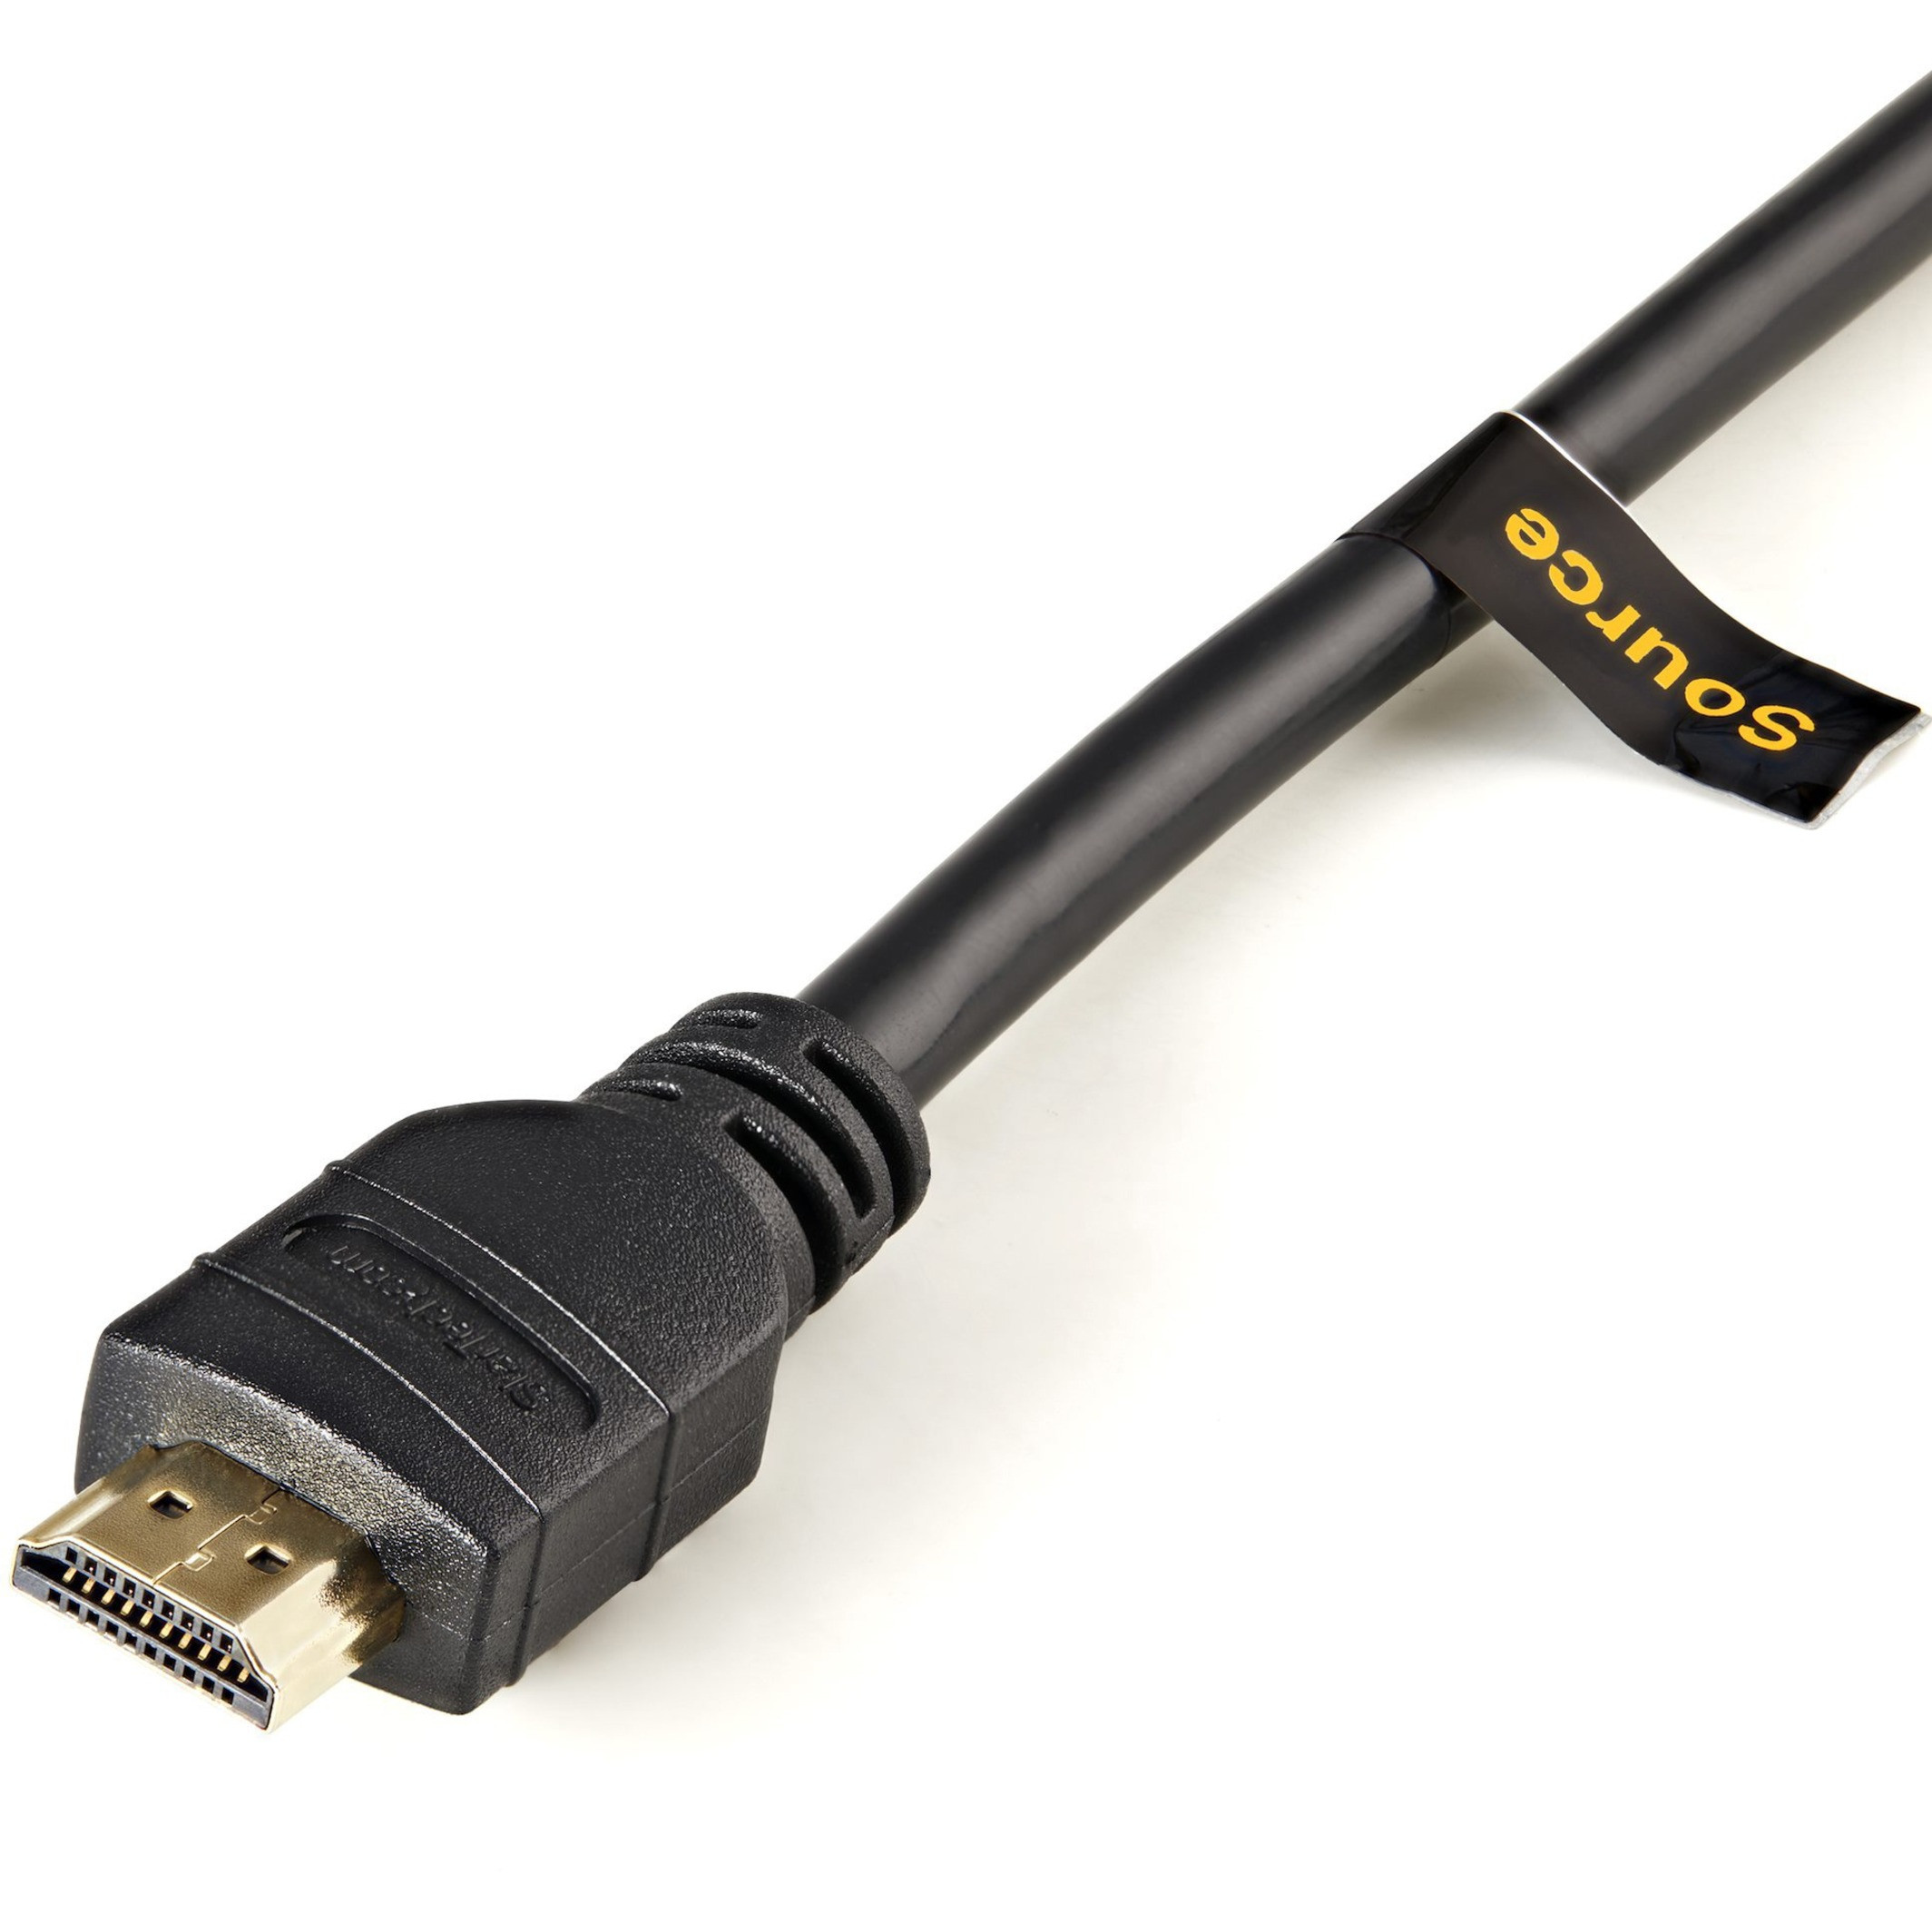 Brise Udsæt Variant Startech .com 33ft (10m) Active HDMI Cable, 4K 30Hz UHD High Speed HDMI 1.4  Cable with Ethernet, CL2 Rated HDMI Cord for In-Wall Install32.8f...  HDMM10MA - Corporate Armor